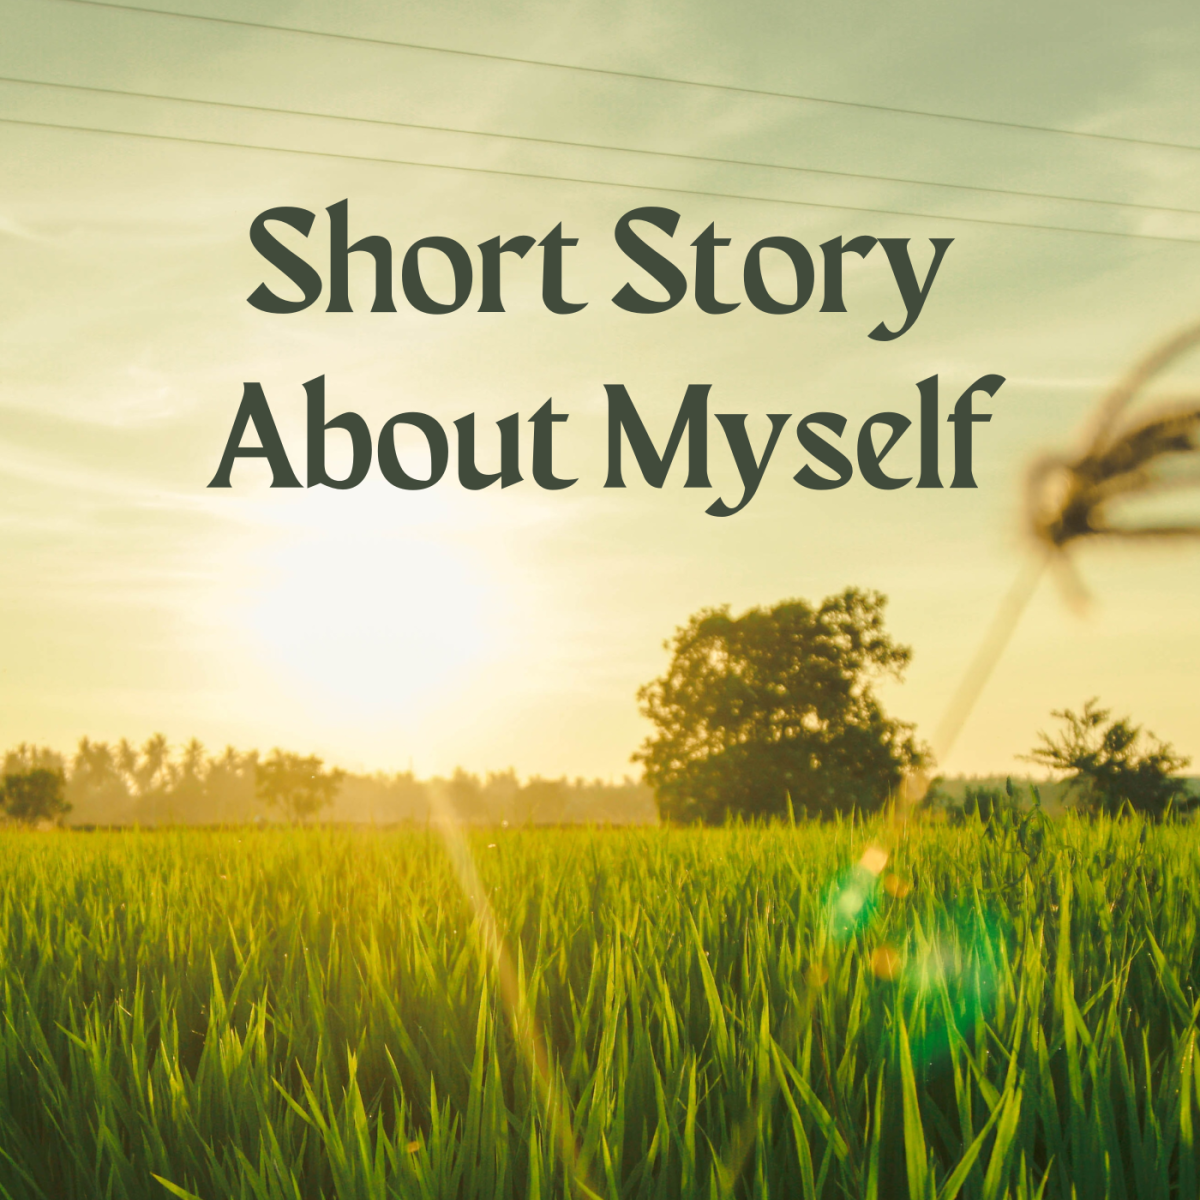 I share some important memories from my early childhood in this personal story.